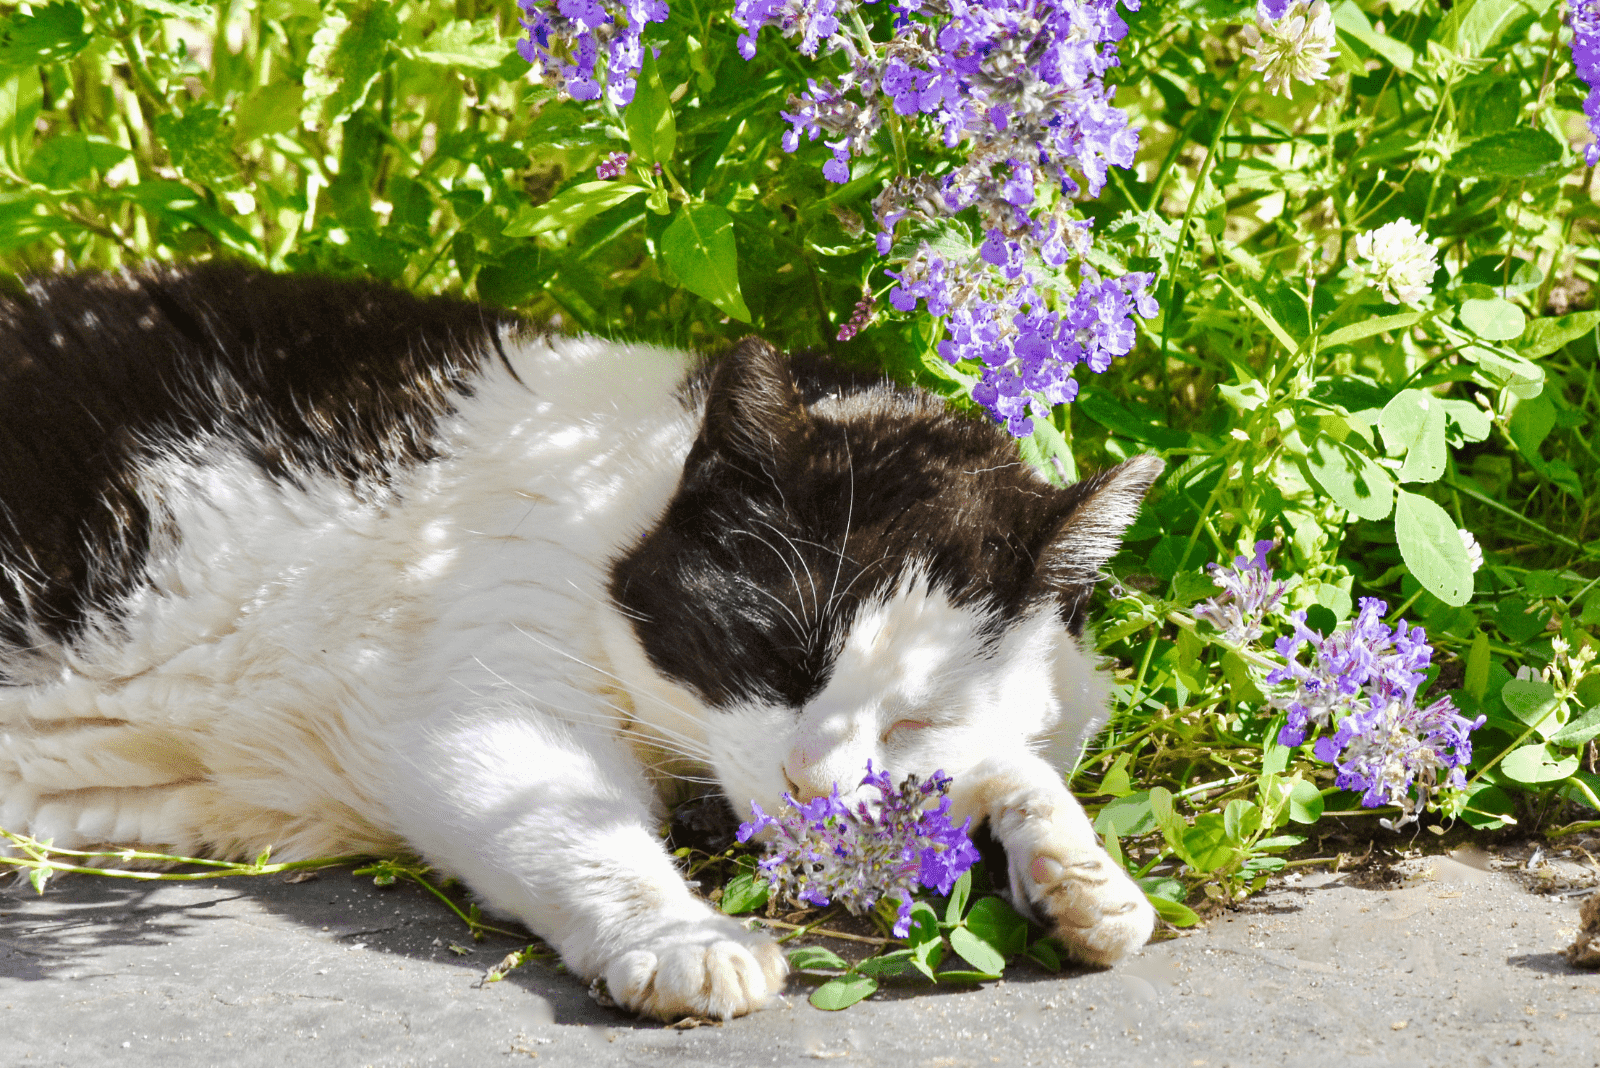 the cat sleeps in the flowers